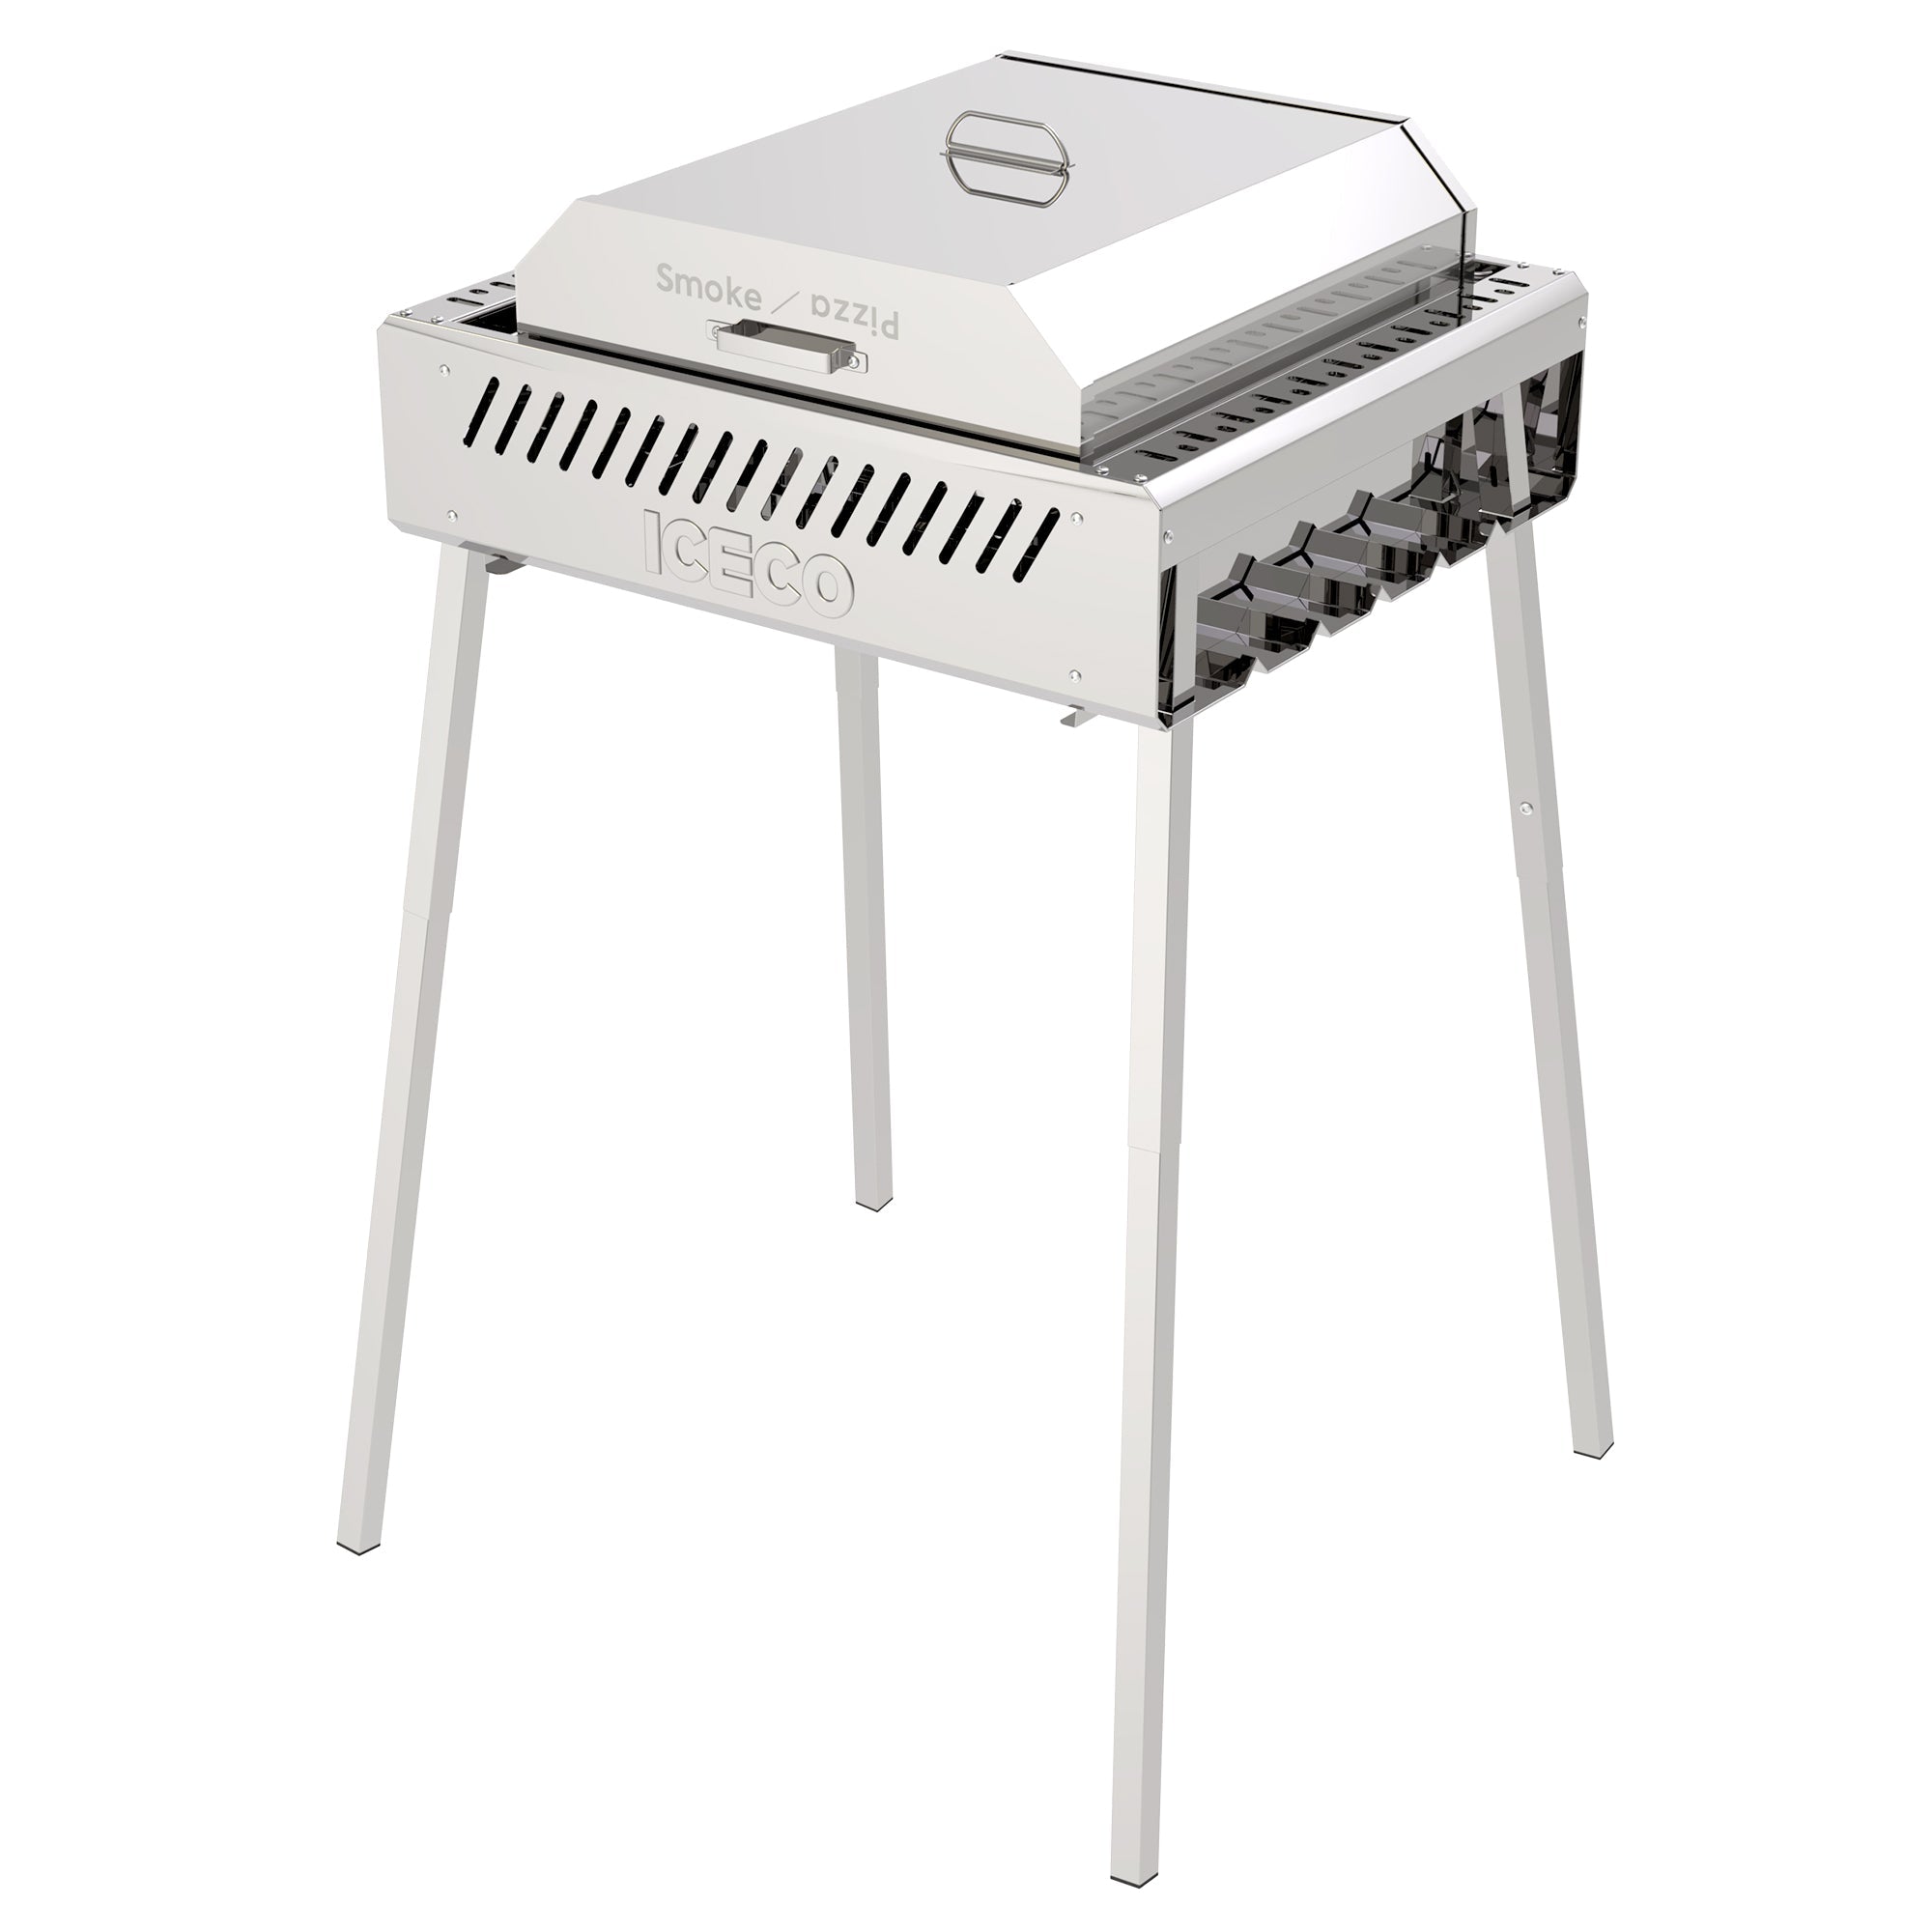 2 in 1 Charcoal Grill With BBQ Tool | ICECO-www.icecofreezer.com